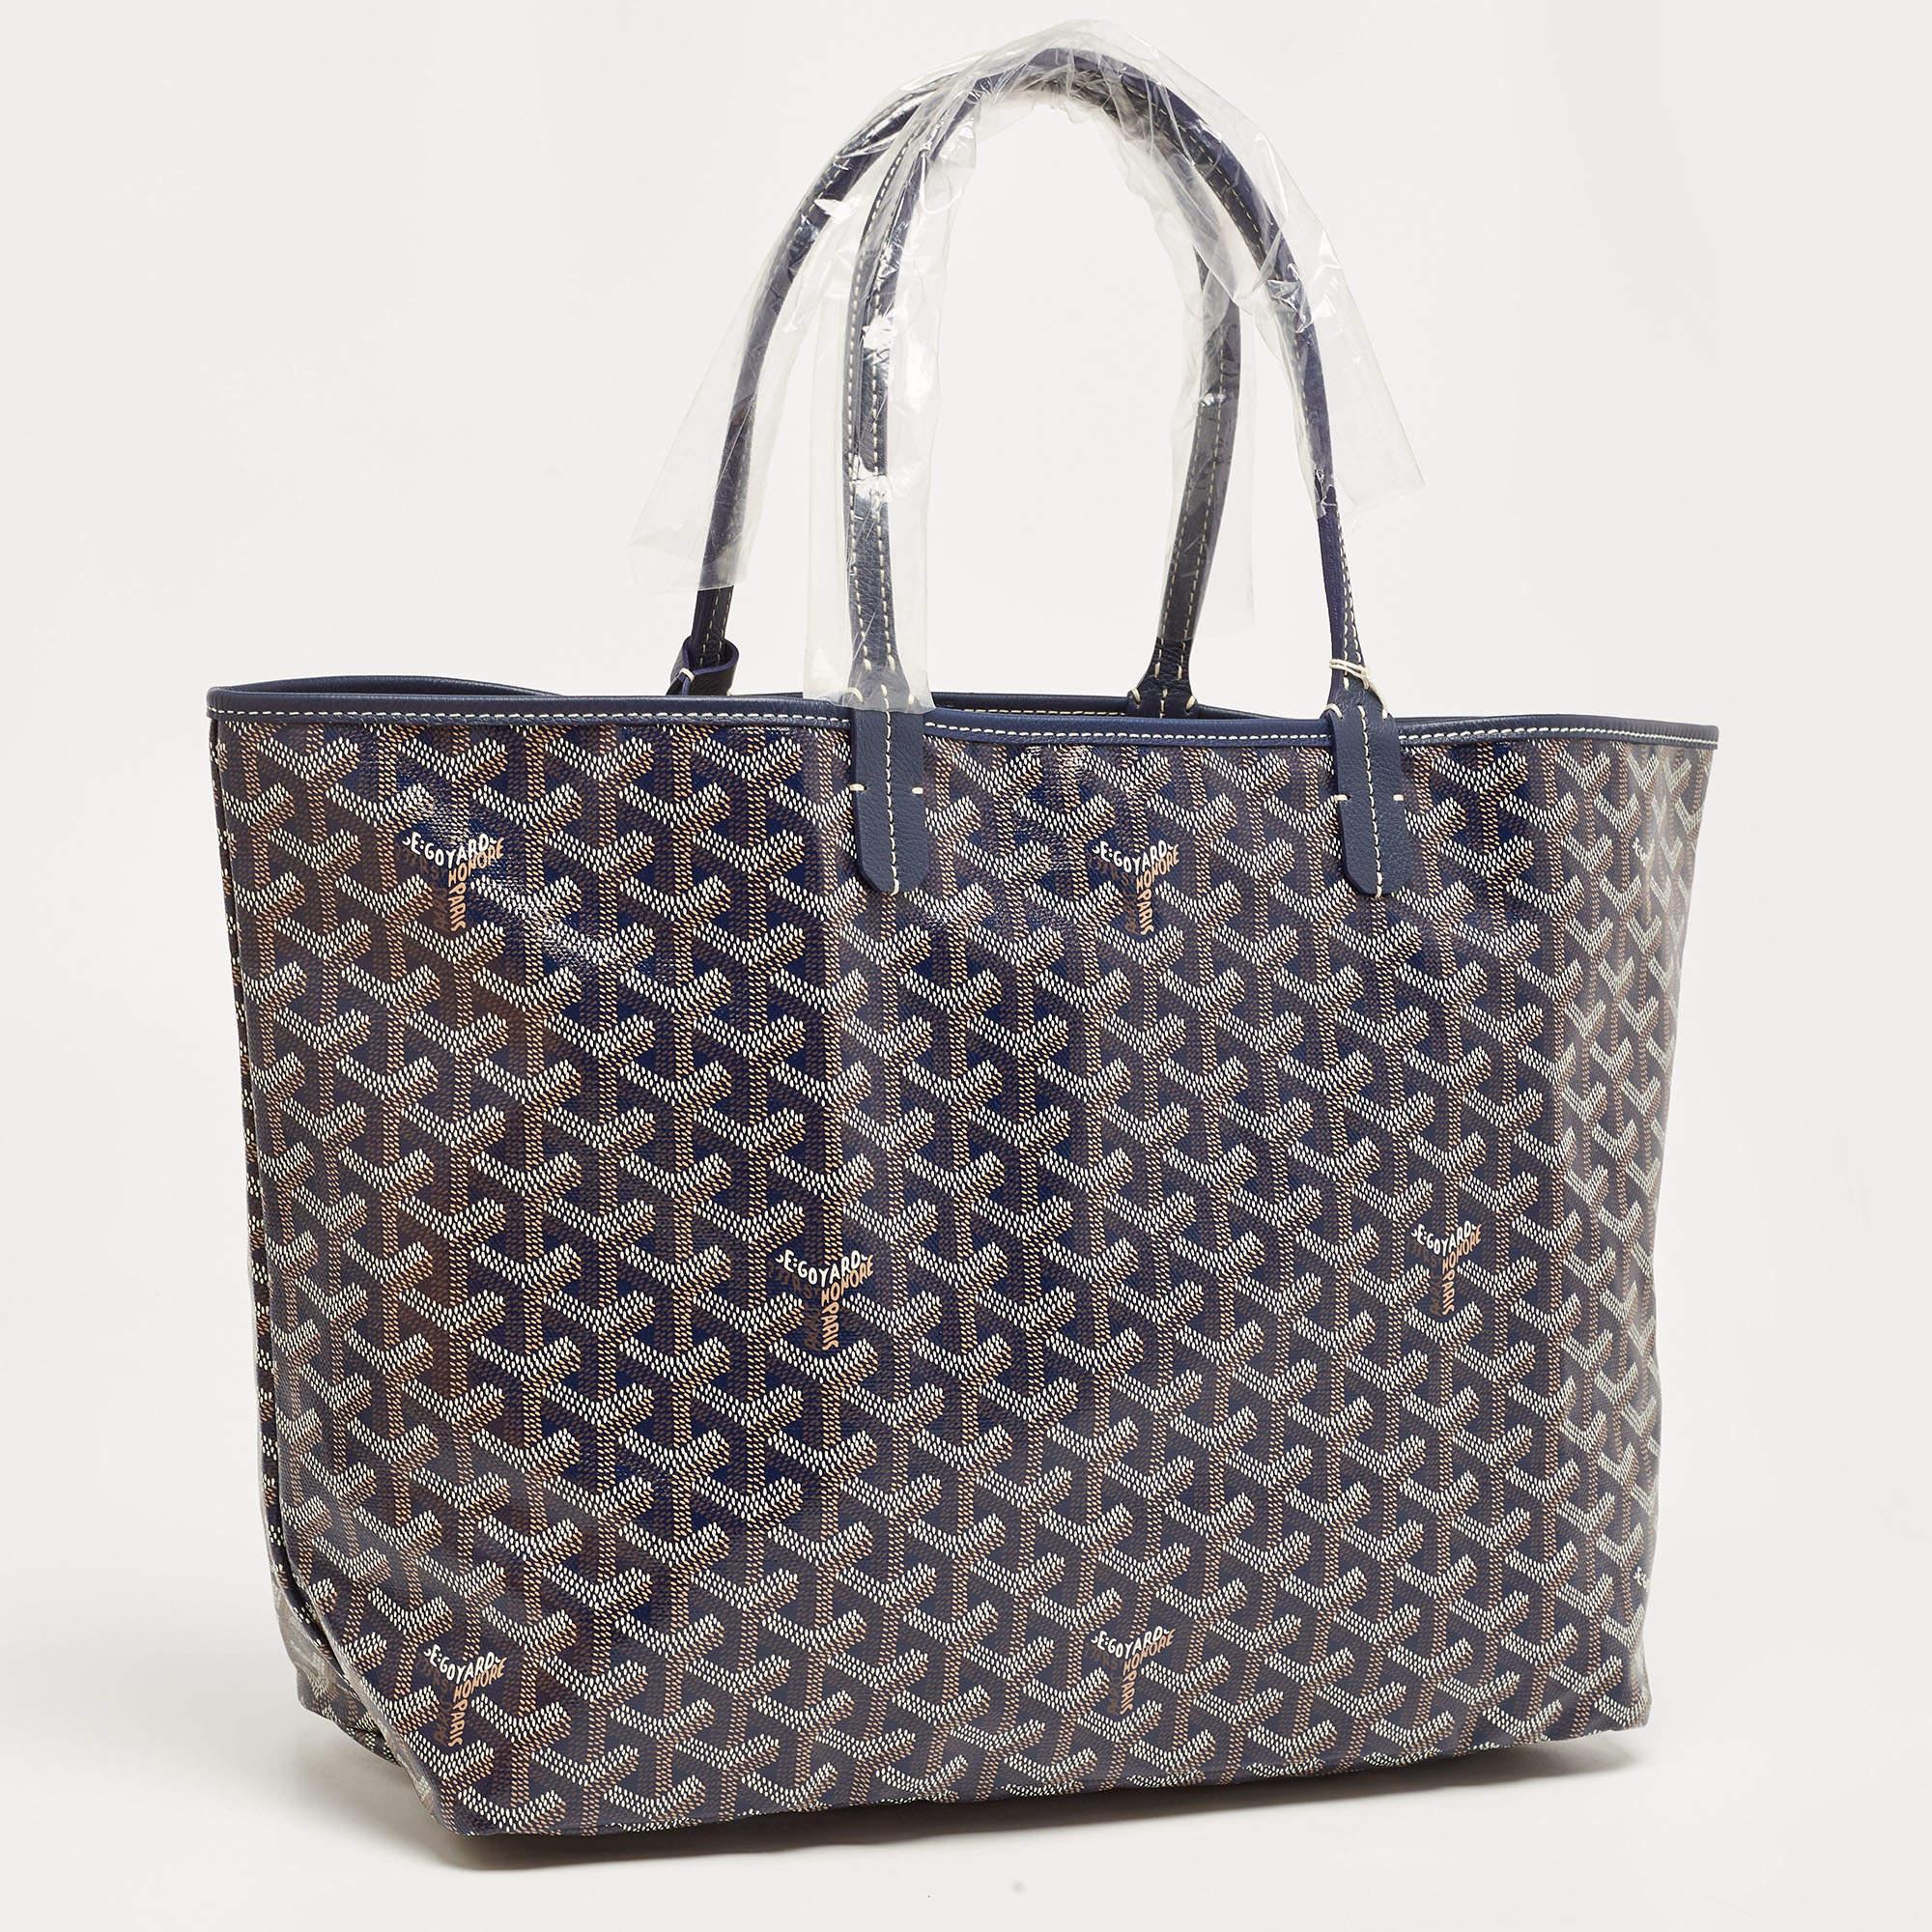 Carry everything you need in style thanks to this authentic Goyard tote. Crafted from the best materials, this is an accessory that promises enduring style and usage.

